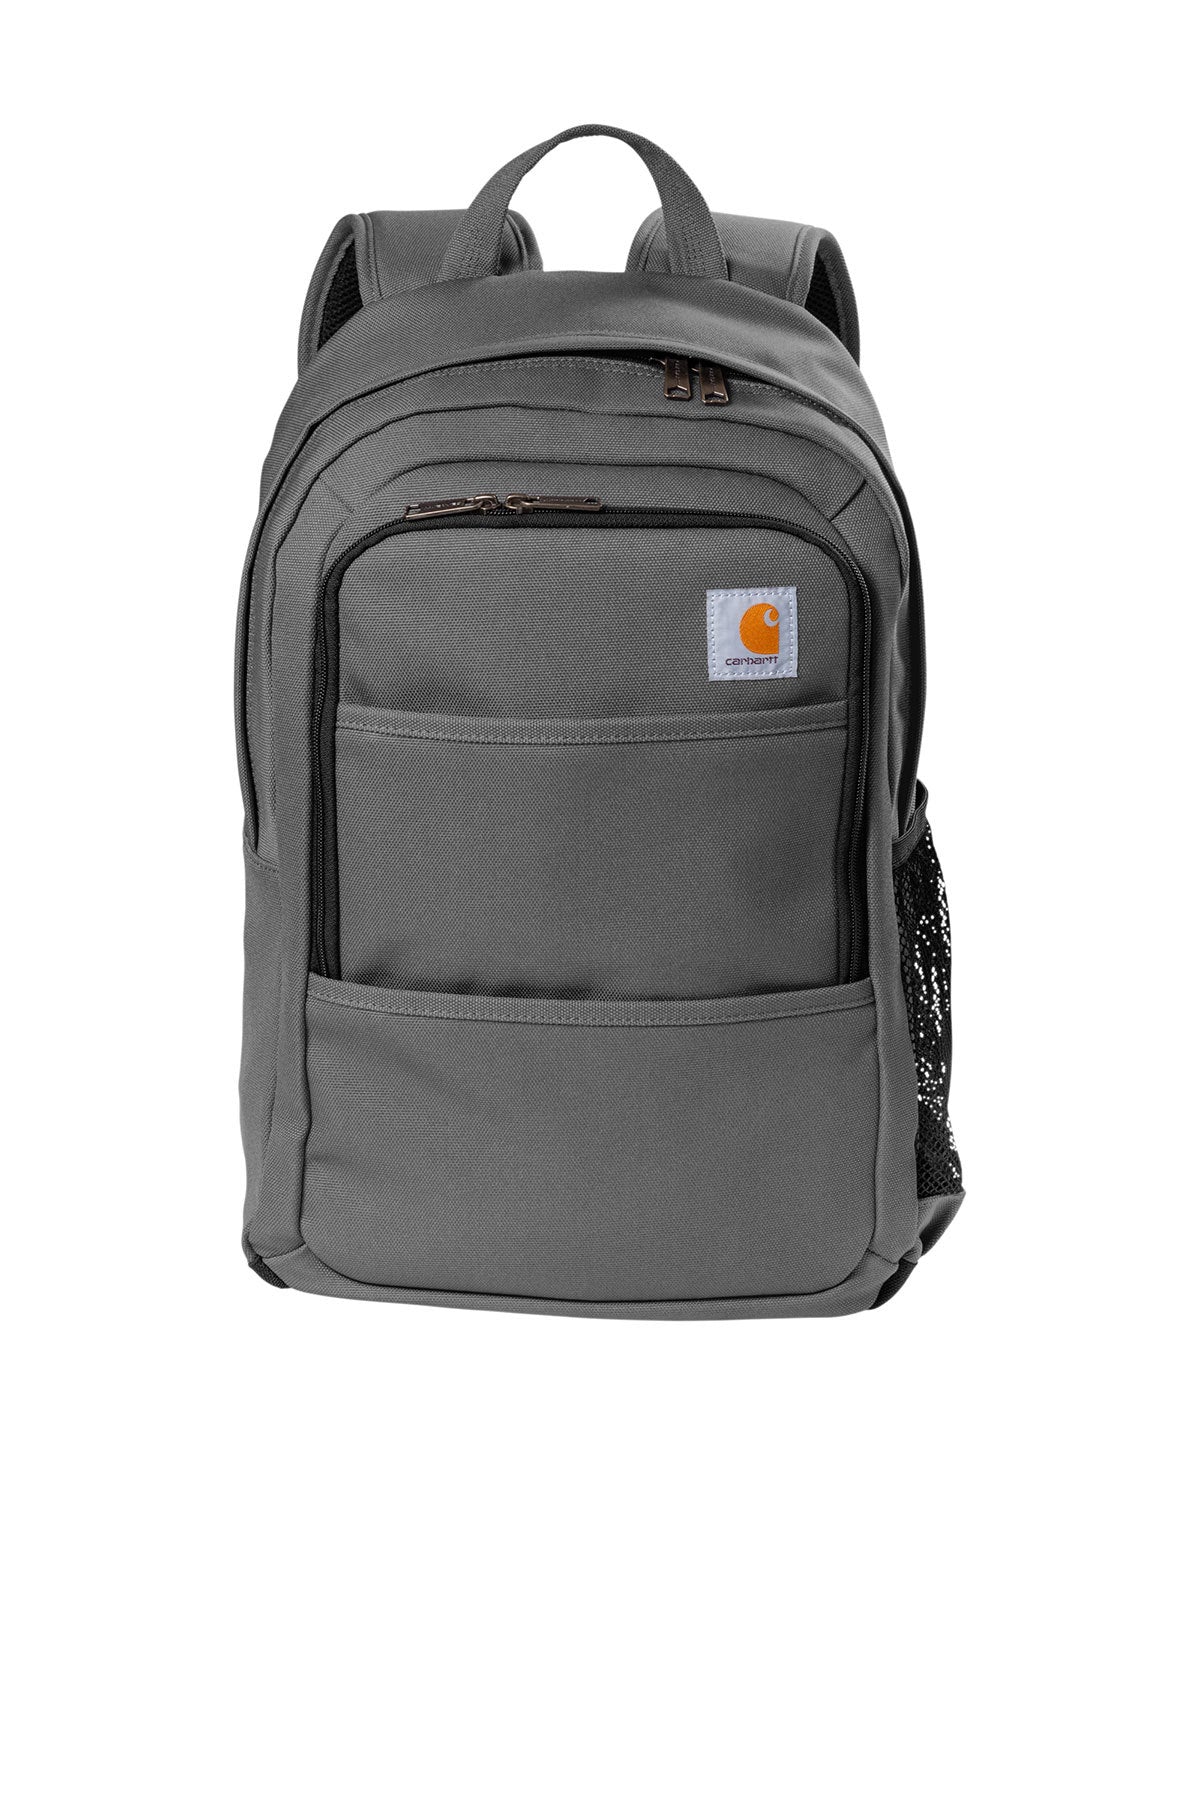 Carhartt® - Foundry Series Backpack - CT89350303